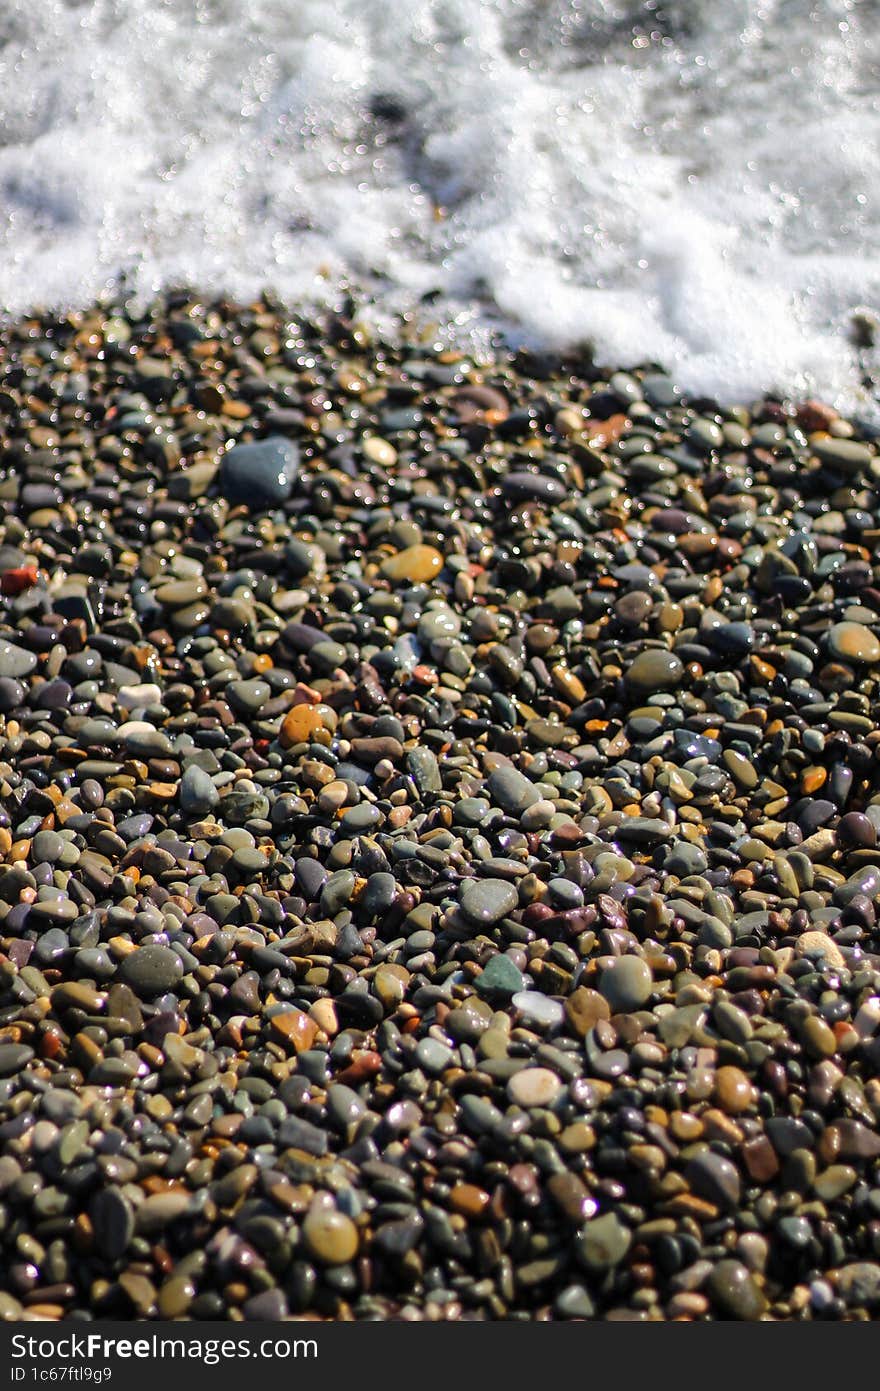 Wet stones by the sea .The beach is linked with small colorful pebbles. Sea foam from small waves.